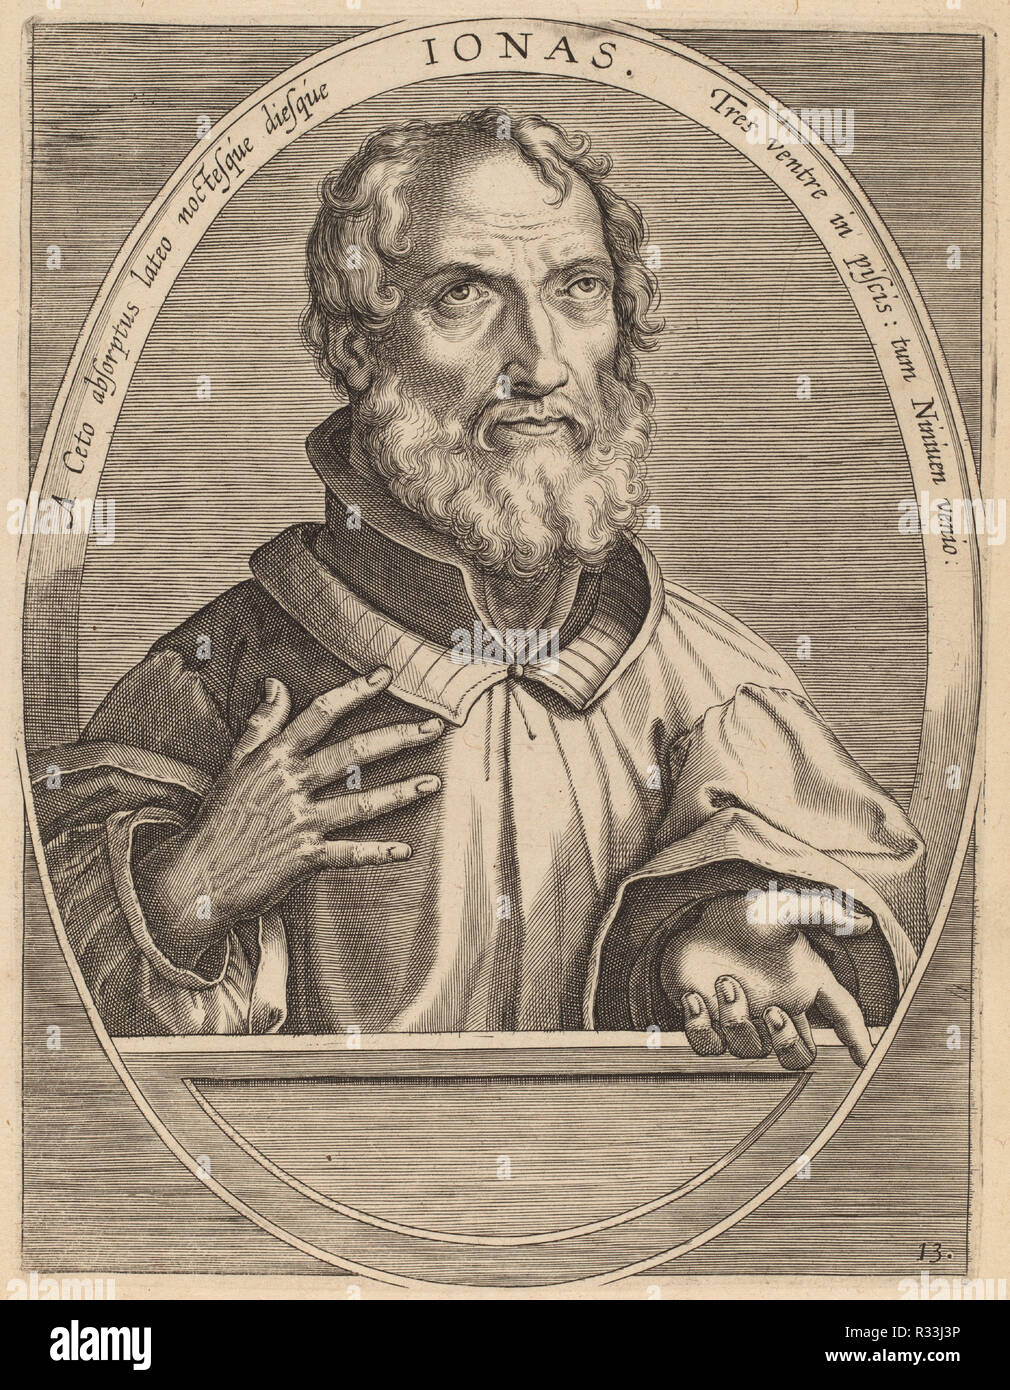 Ionas. Dated: published 1613. Dimensions: plate: 17.9 x 13.6 cm (7 1/16 x 5 3/8 in.)  sheet: 24.3 x 19 cm (9 9/16 x 7 1/2 in.). Medium: engraving on laid paper. Museum: National Gallery of Art, Washington DC. Author: Theodor Galle after Jan van der Straet. Stock Photo